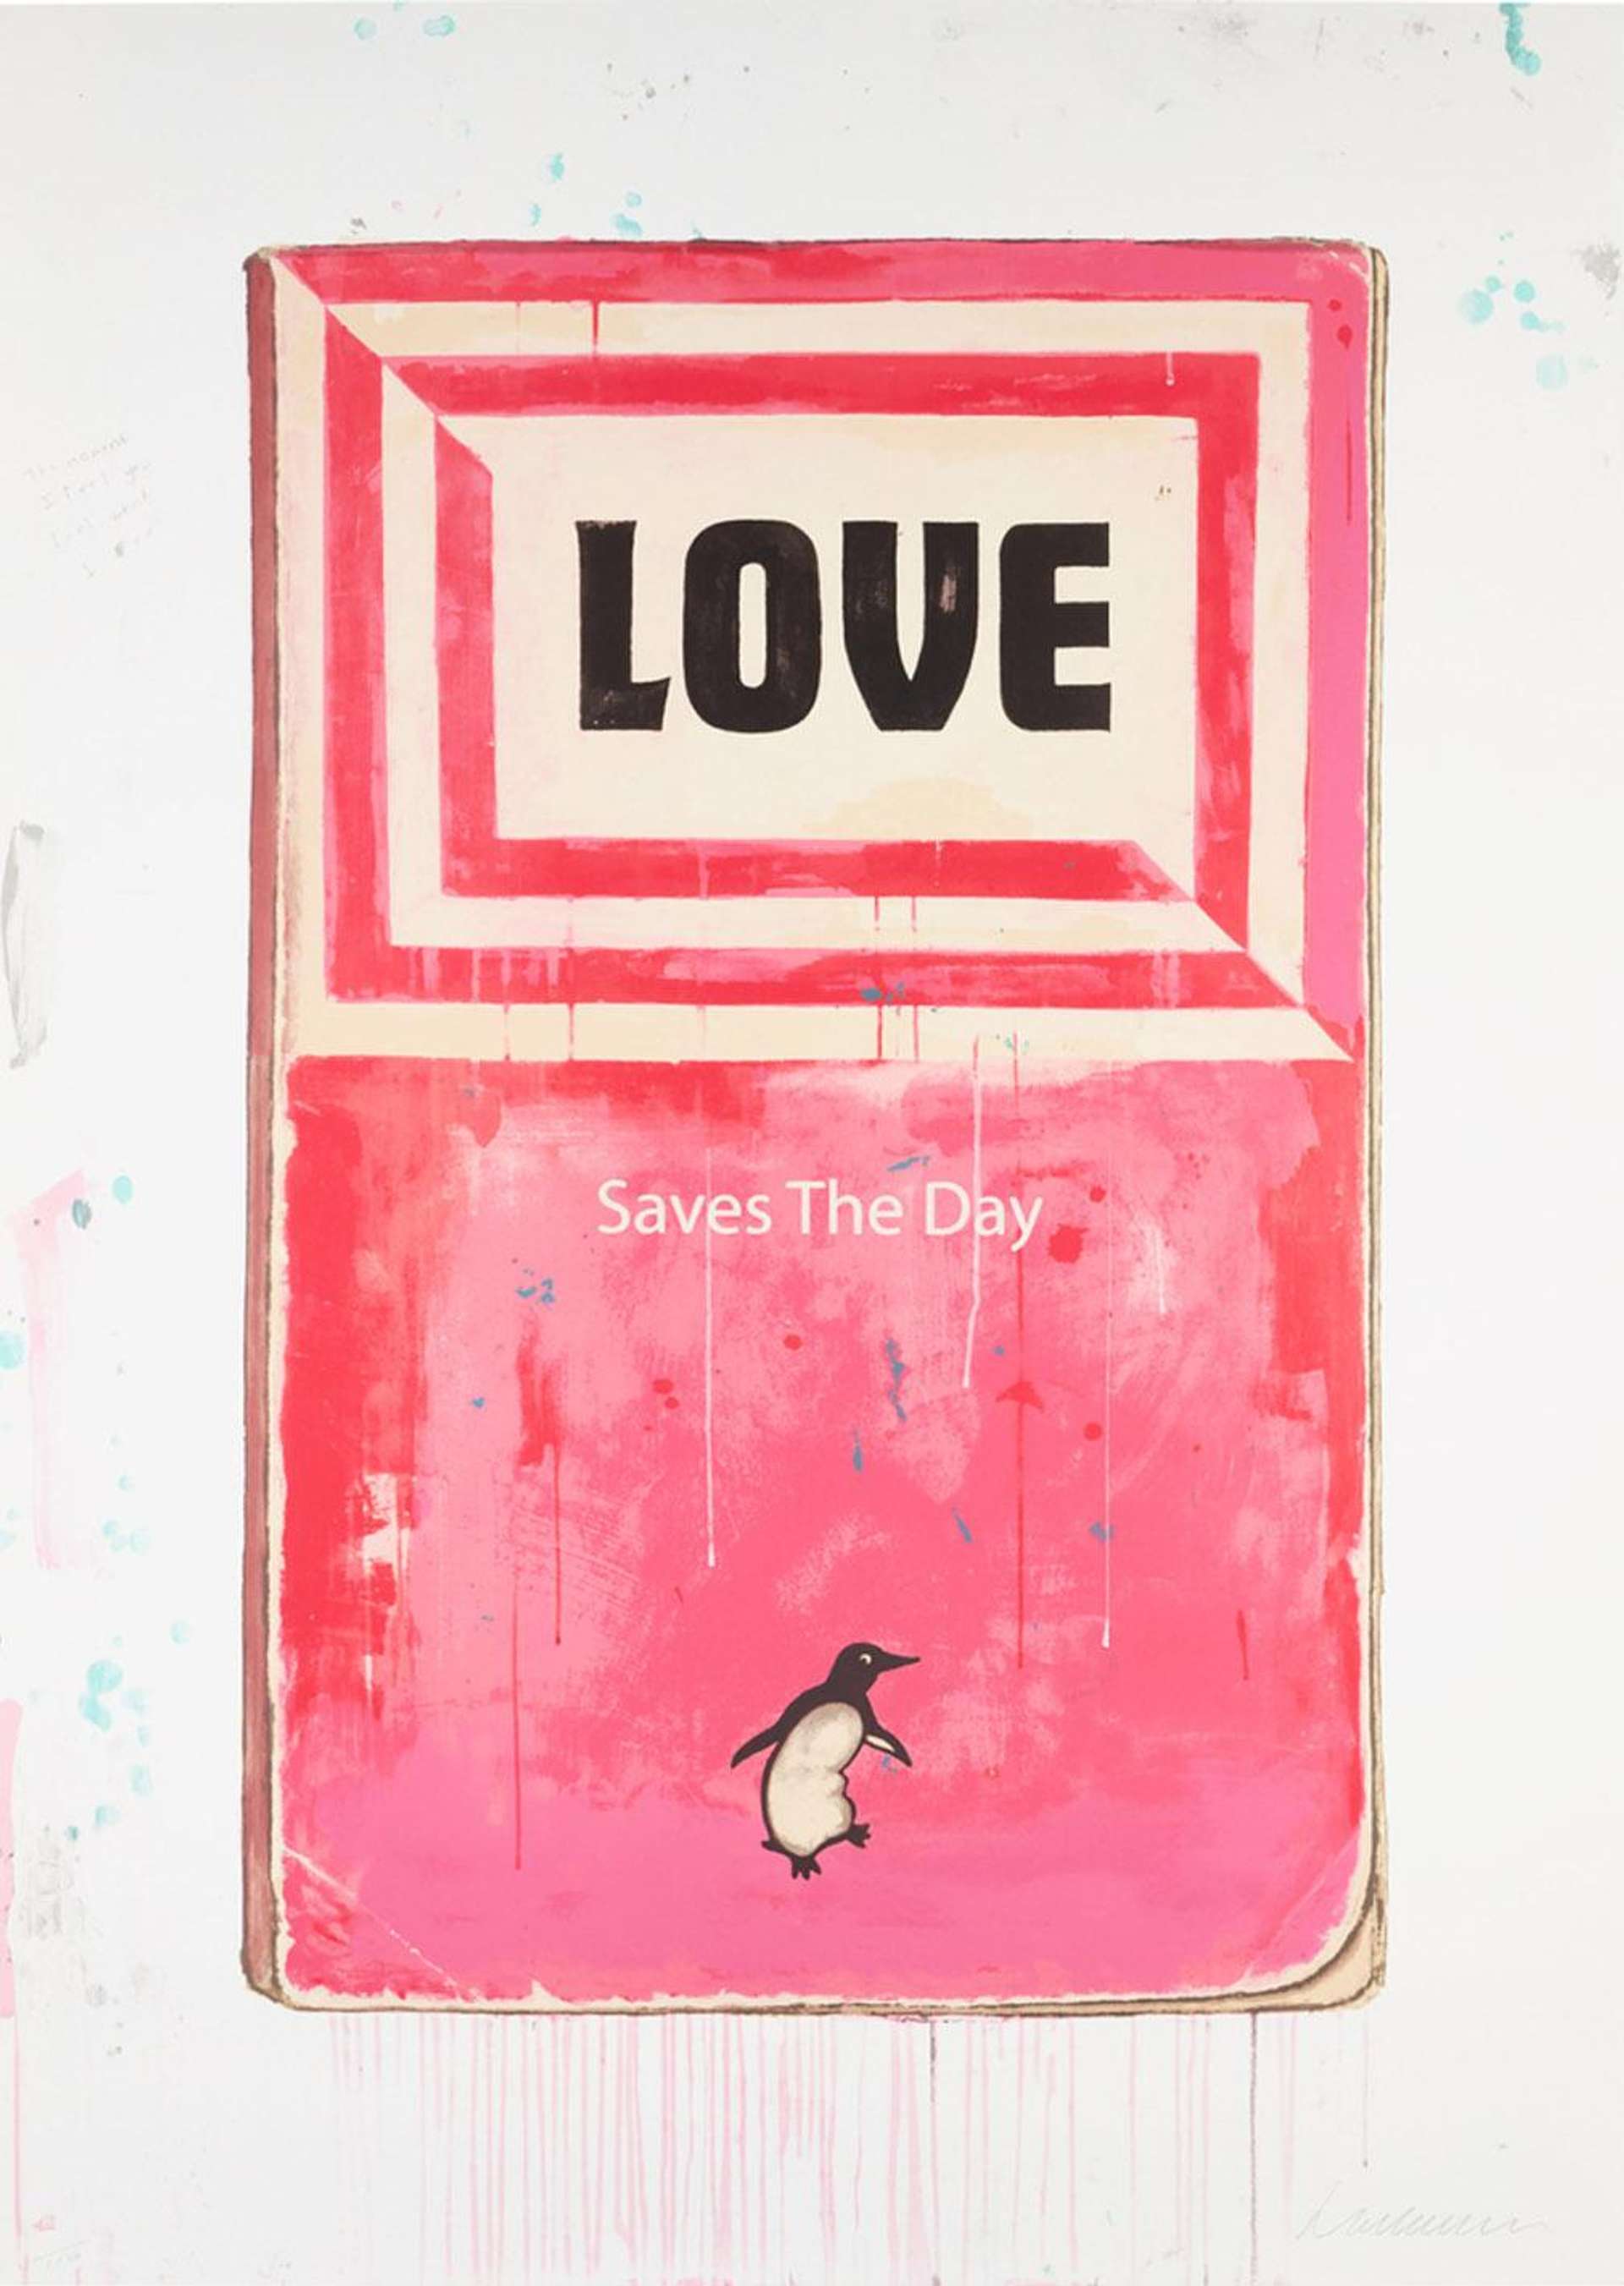 Love Saves The Day by Harland Miller